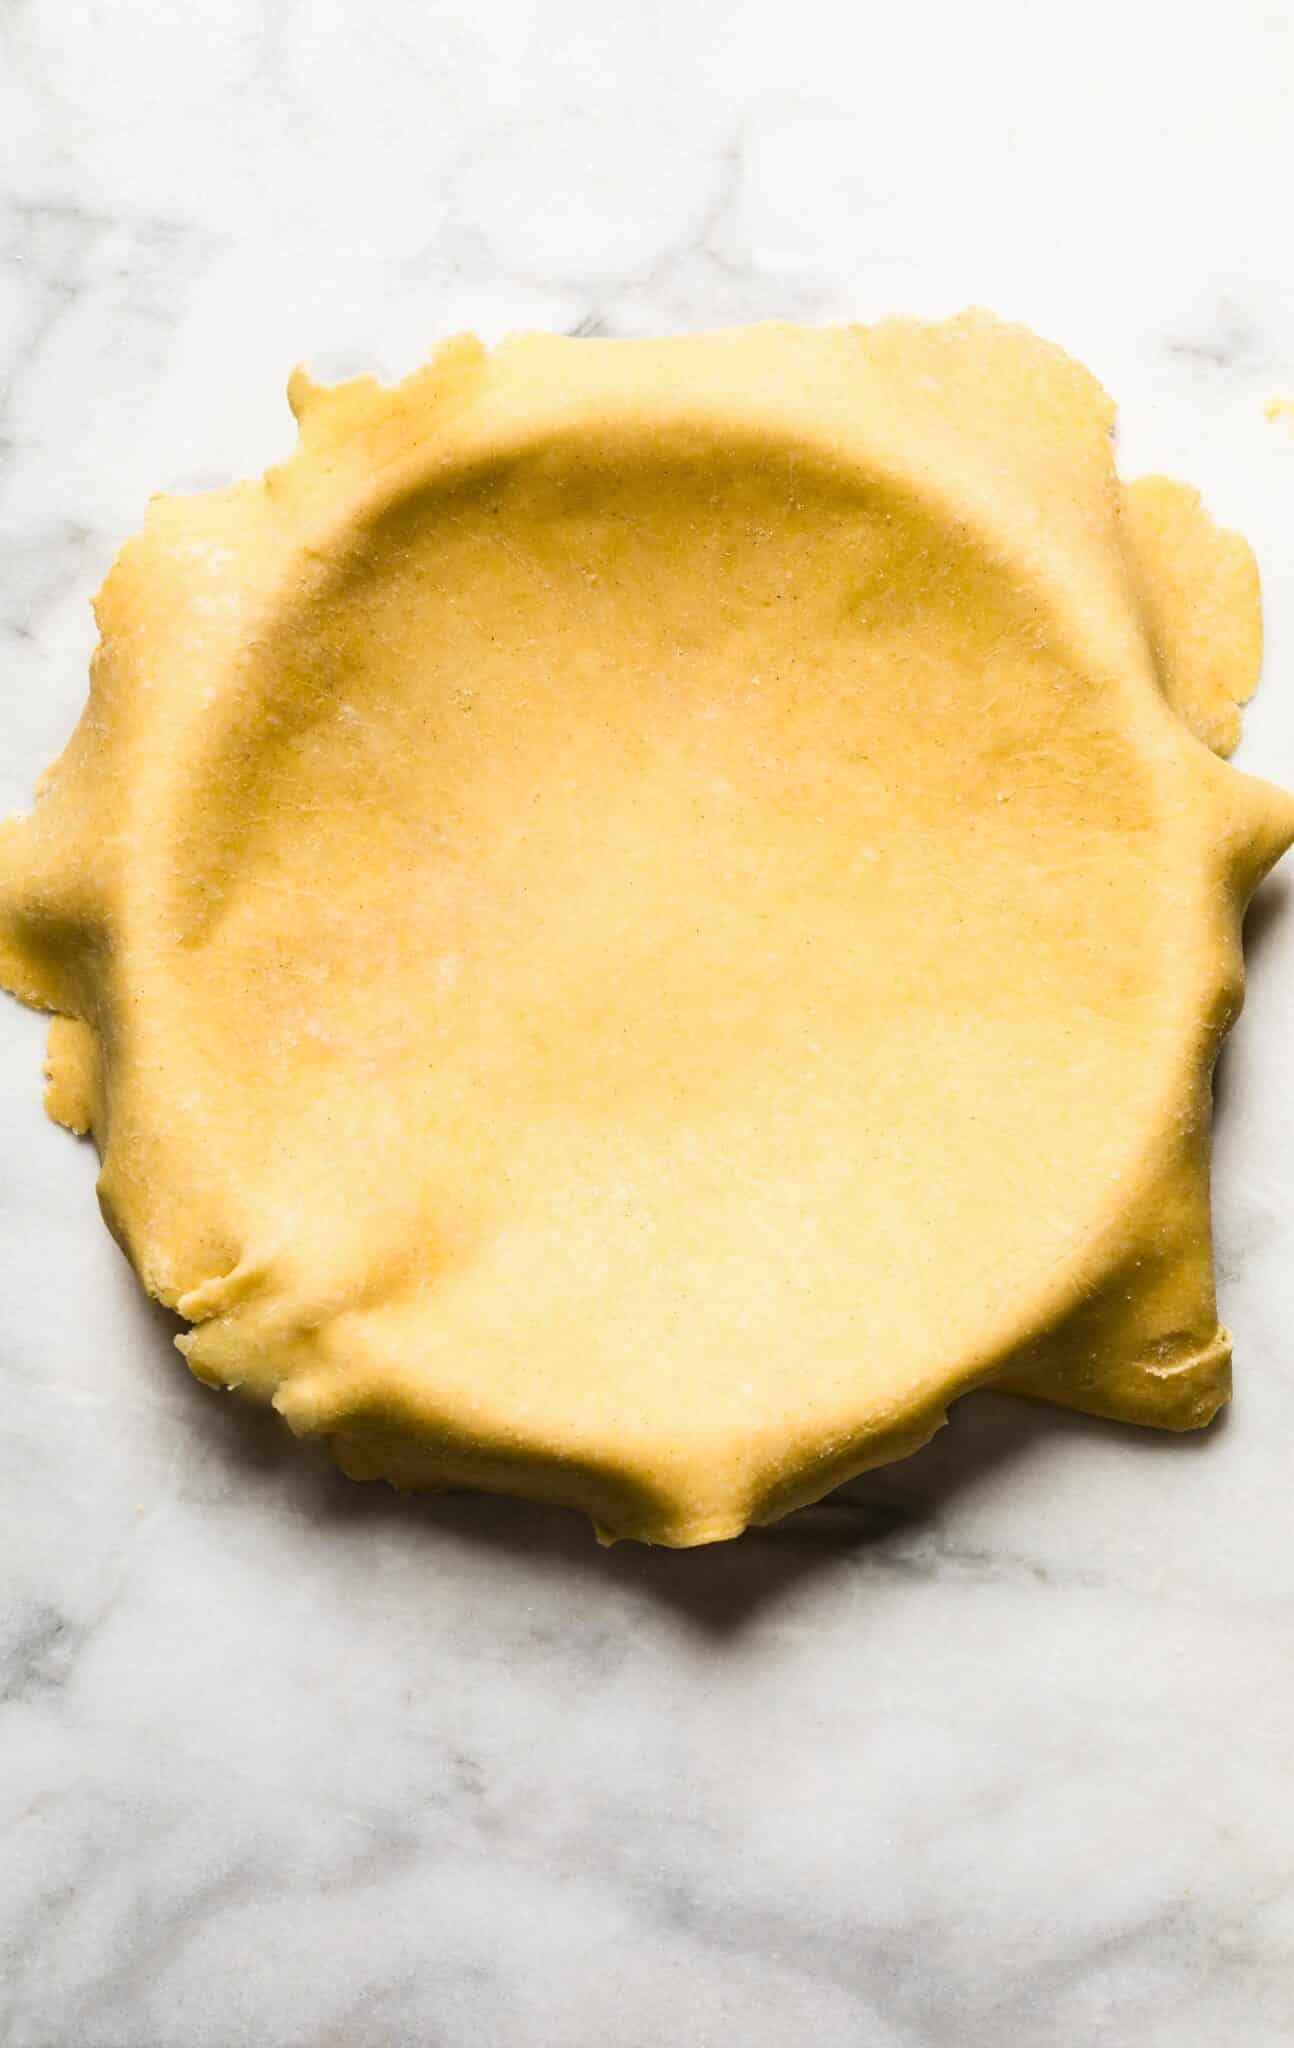 A gluten free pie crust rolled out and laying on a pie tin.